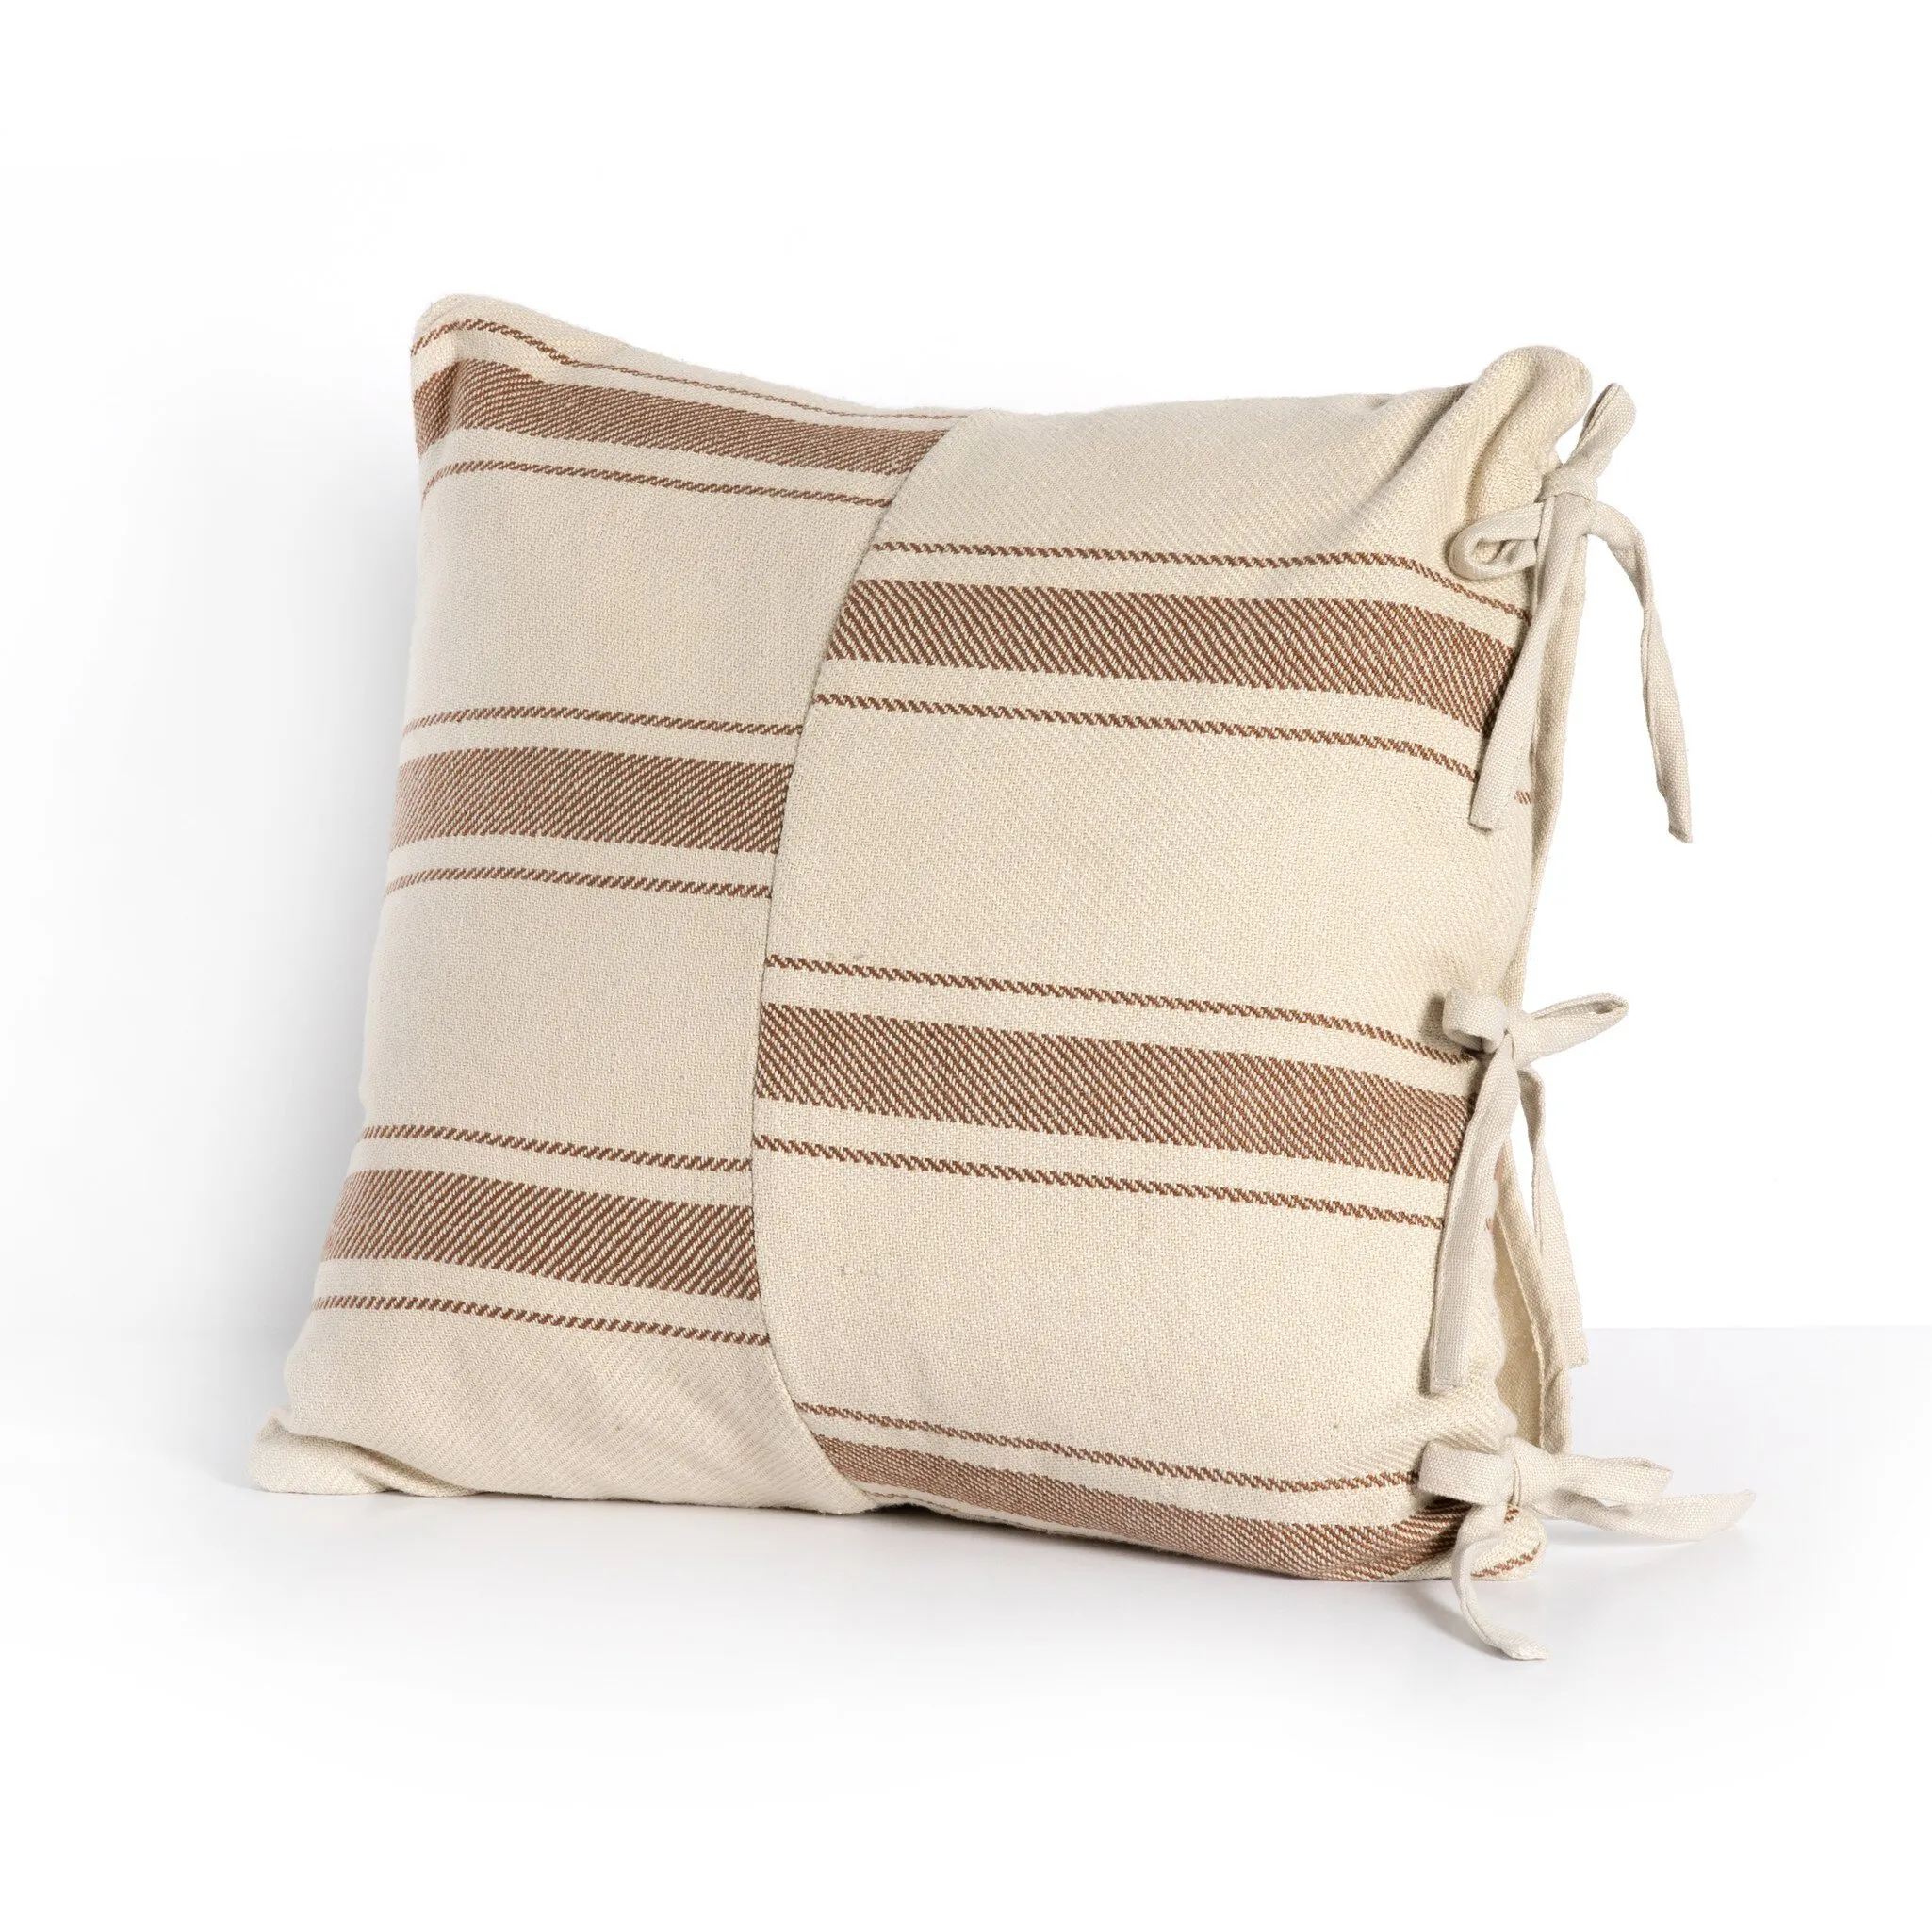 Dashel Patterned Outdoor Pillow Cover